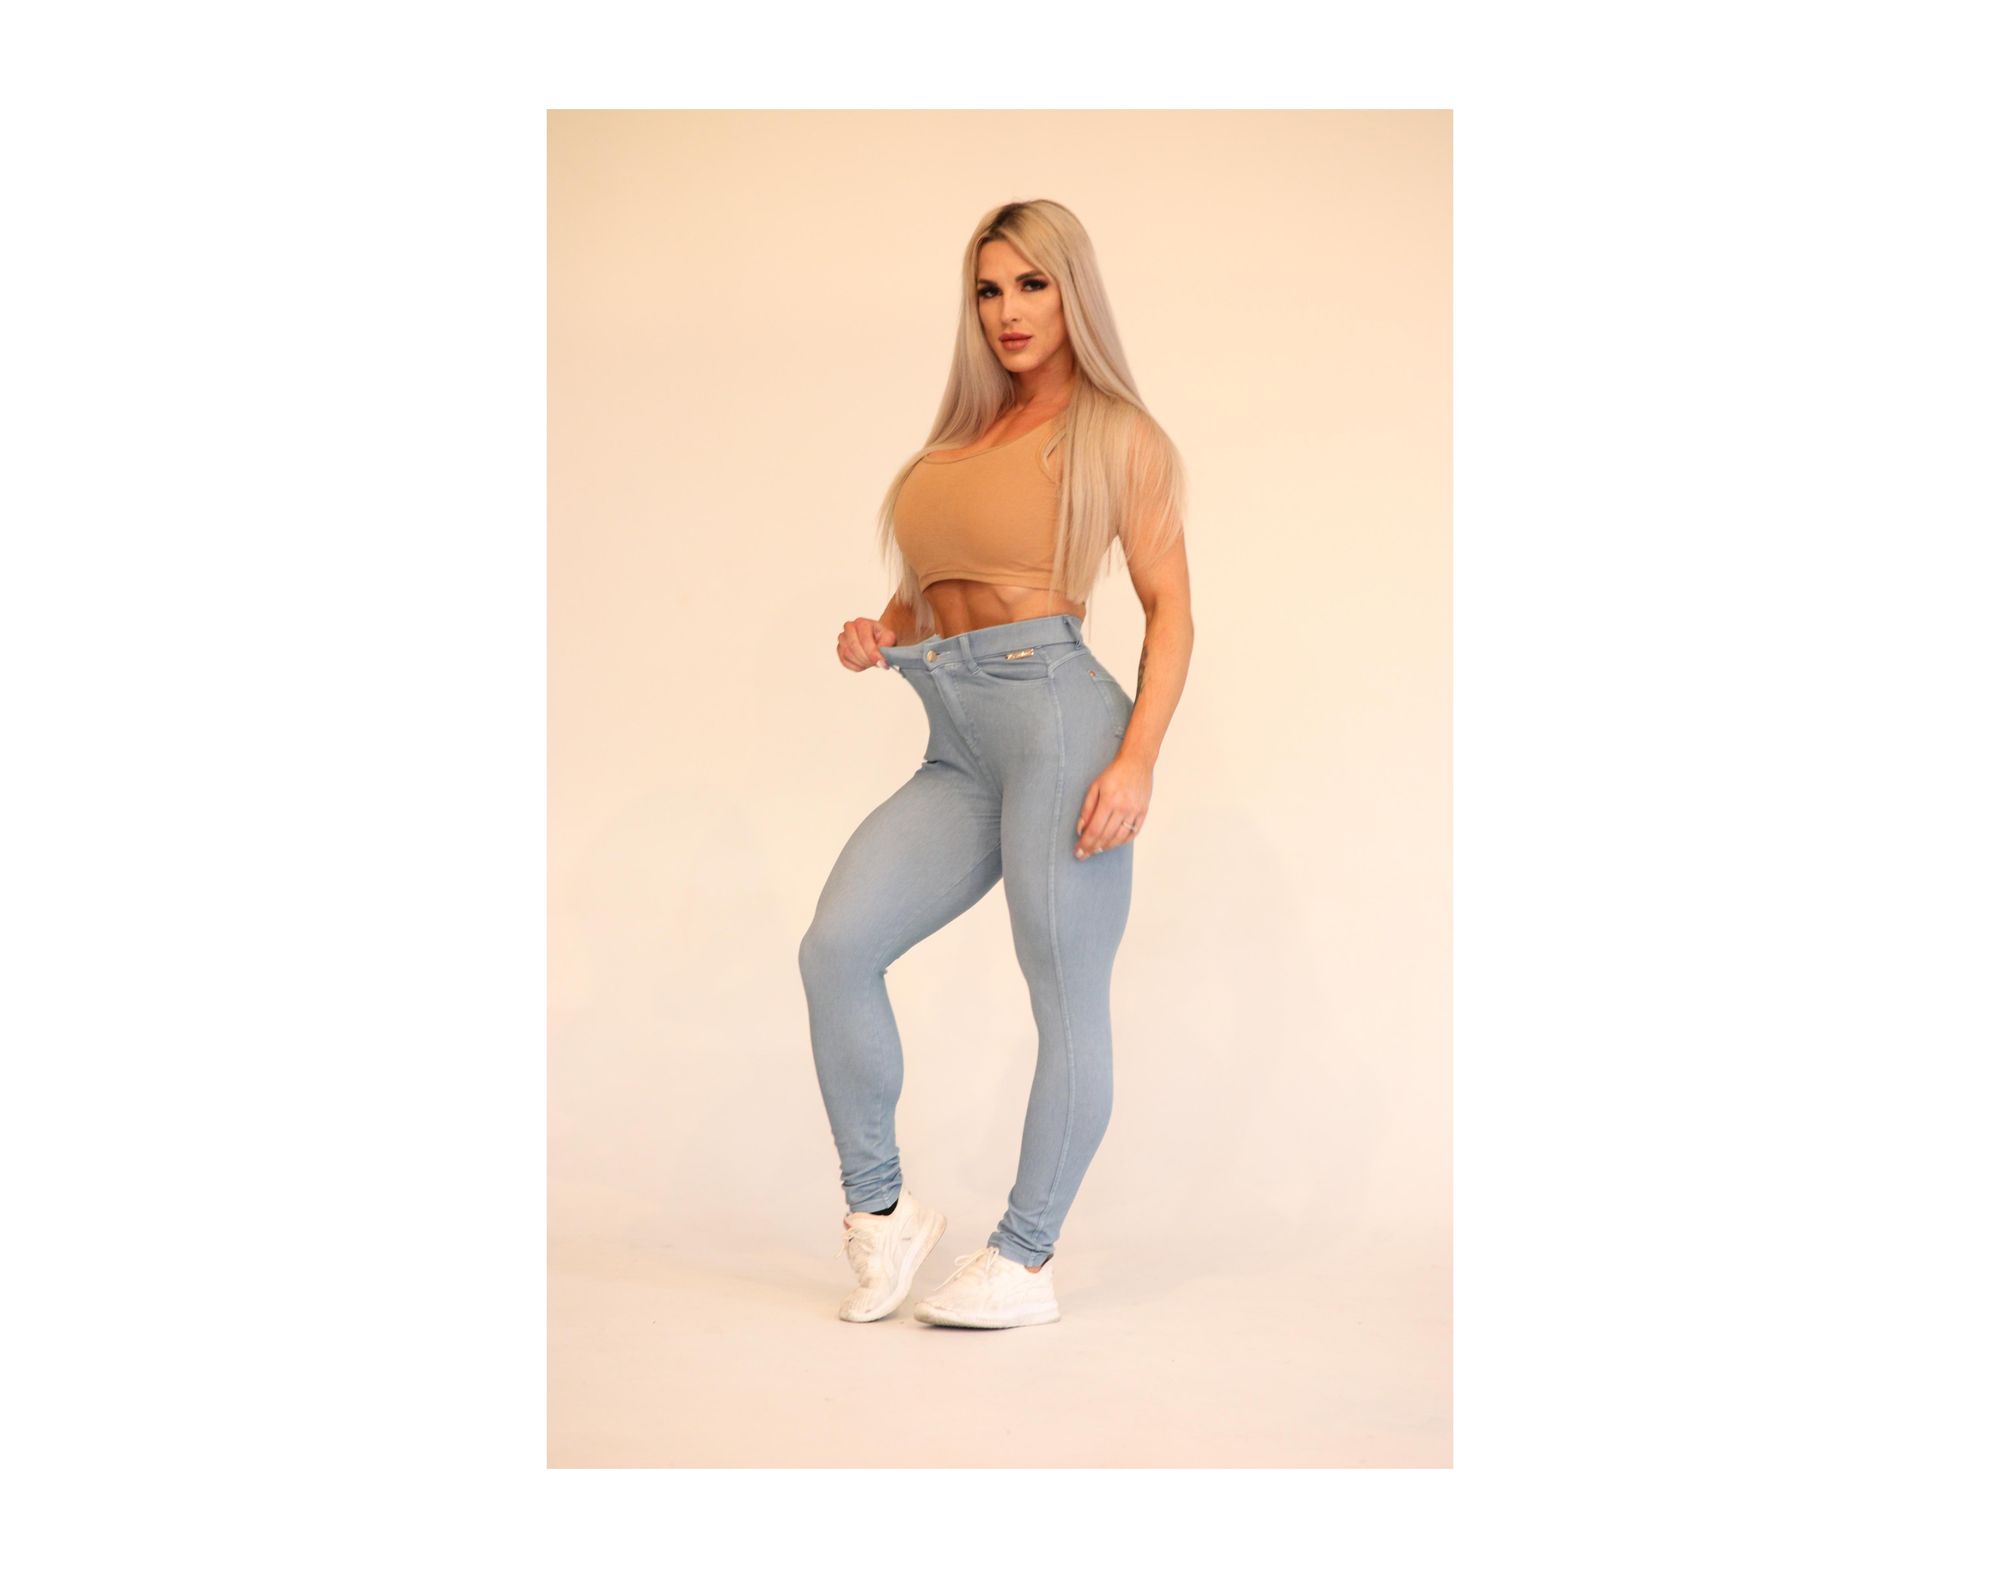 Designed for Athletes and Curvy Women - KG Jeans